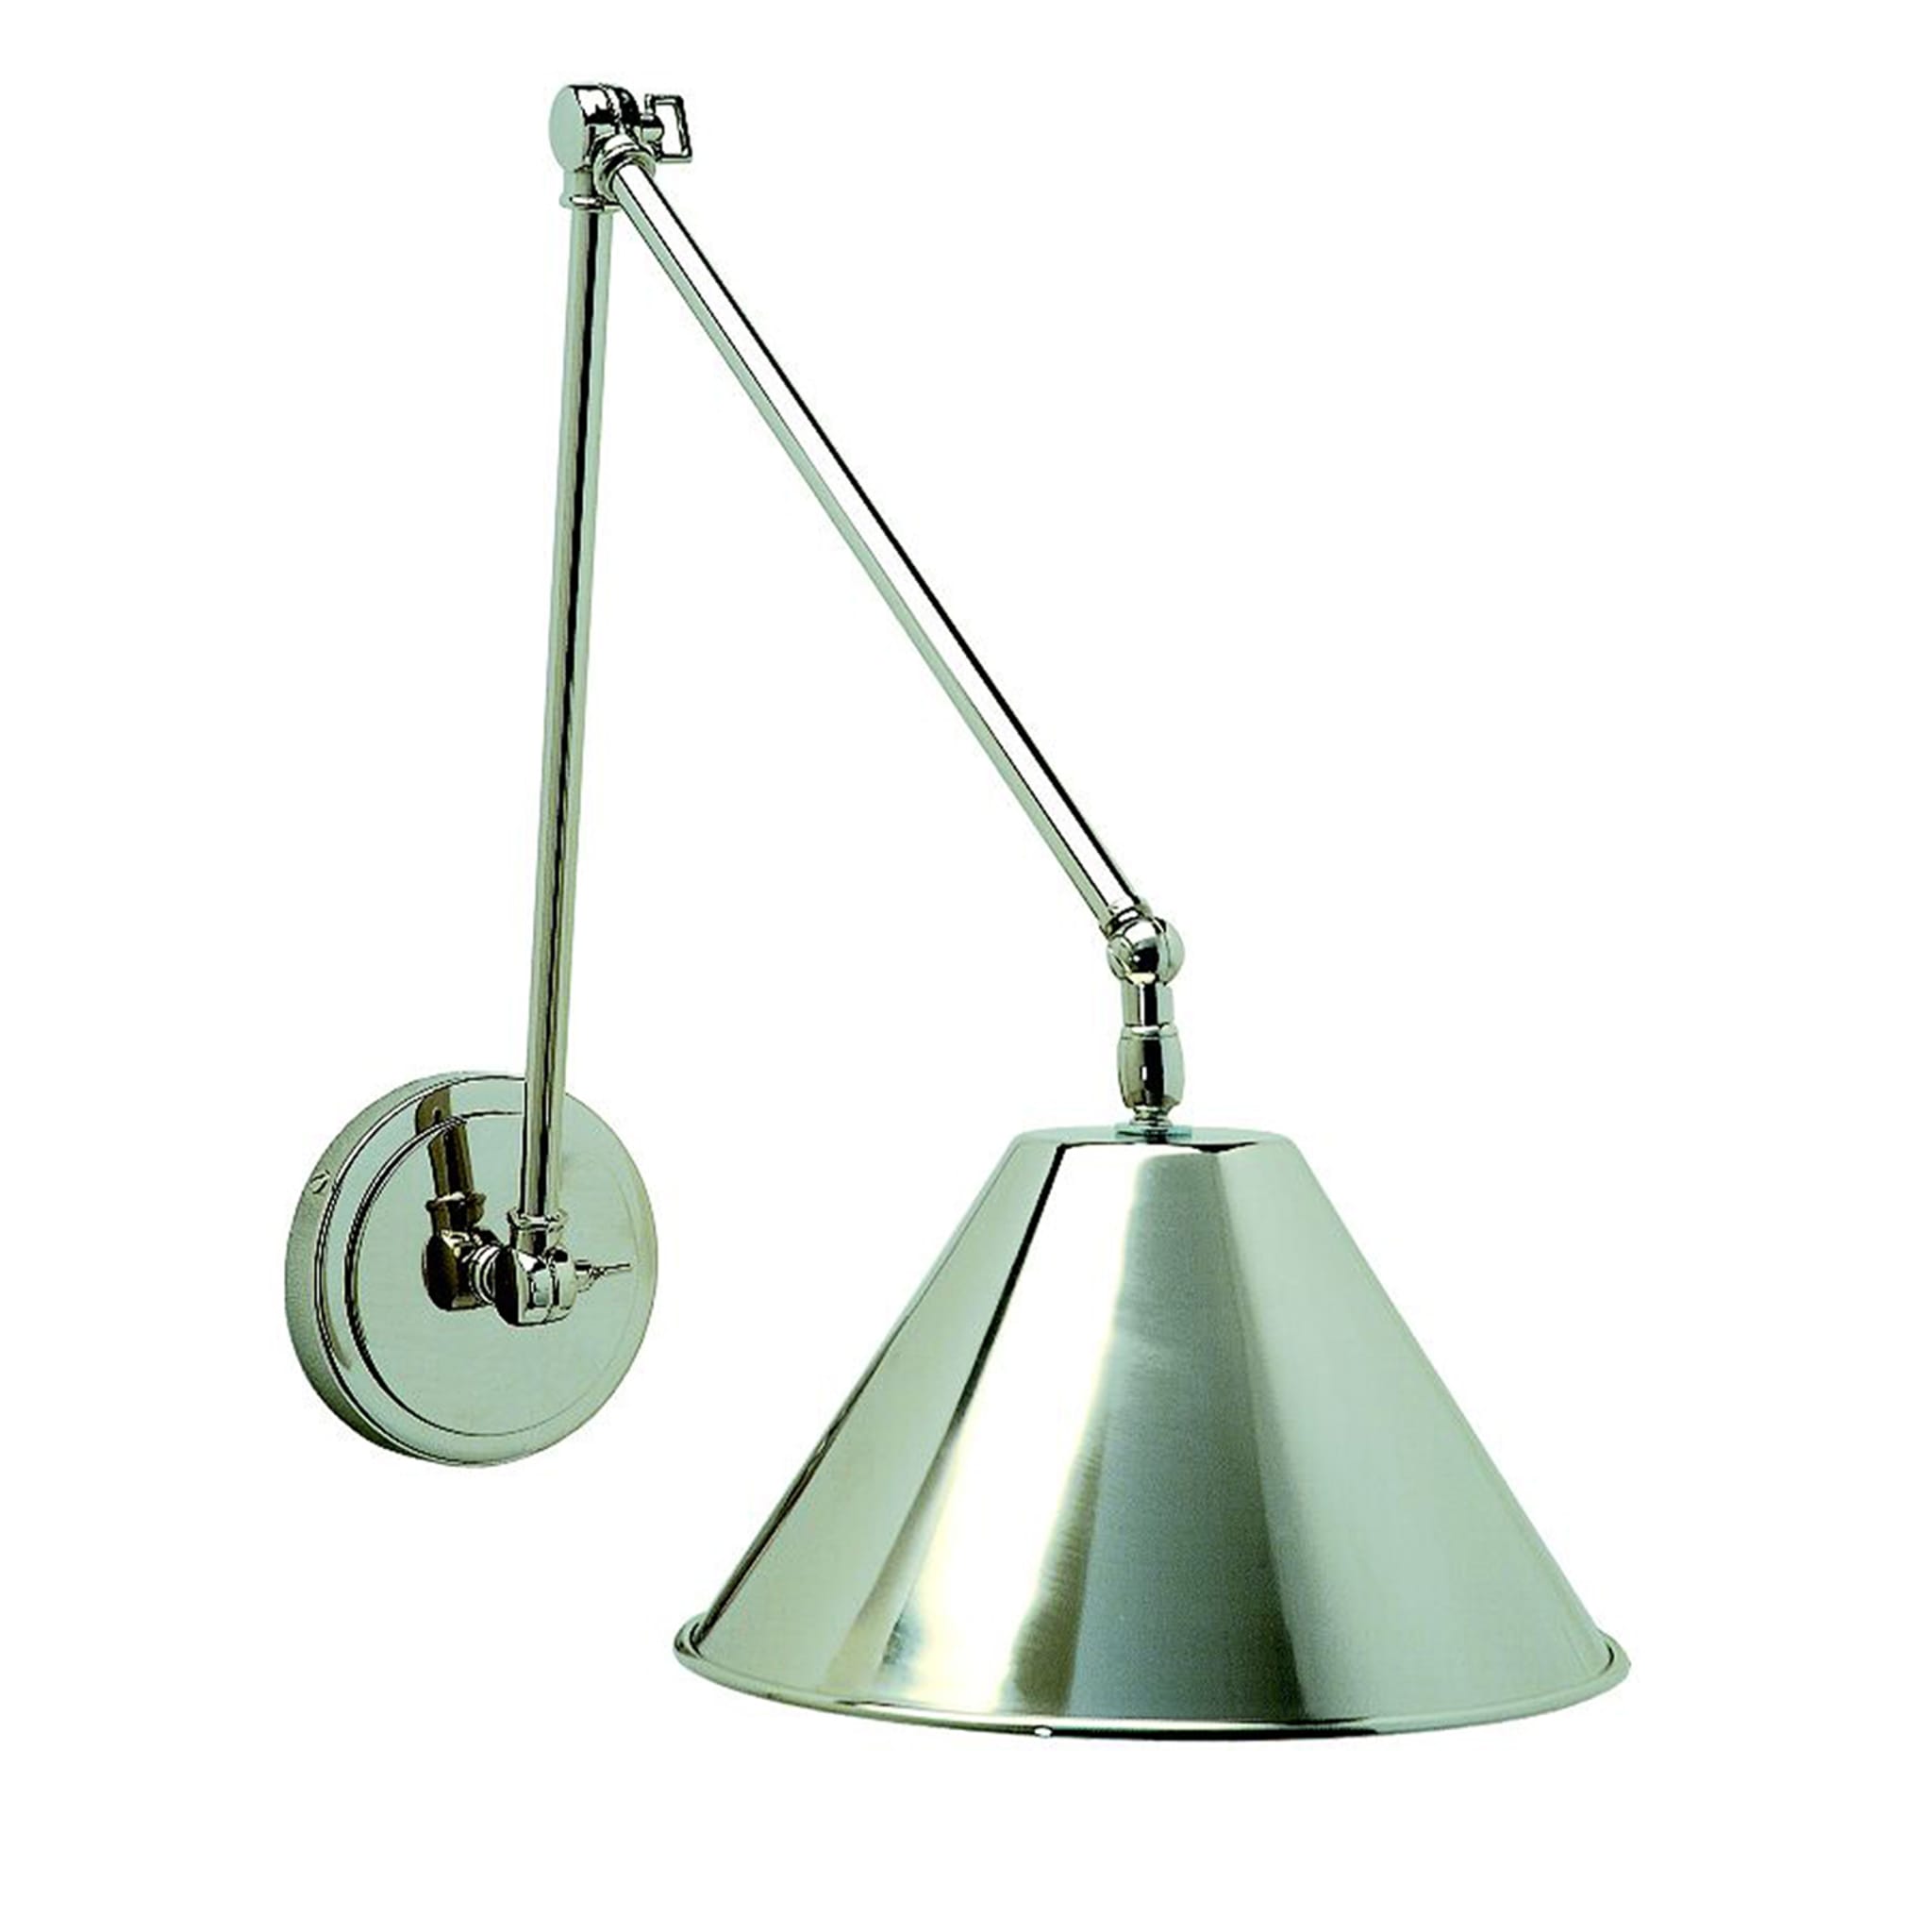 Hamal M182 Chrome Wall Lamp with Jointed Arm by Michele Bönan - Main view